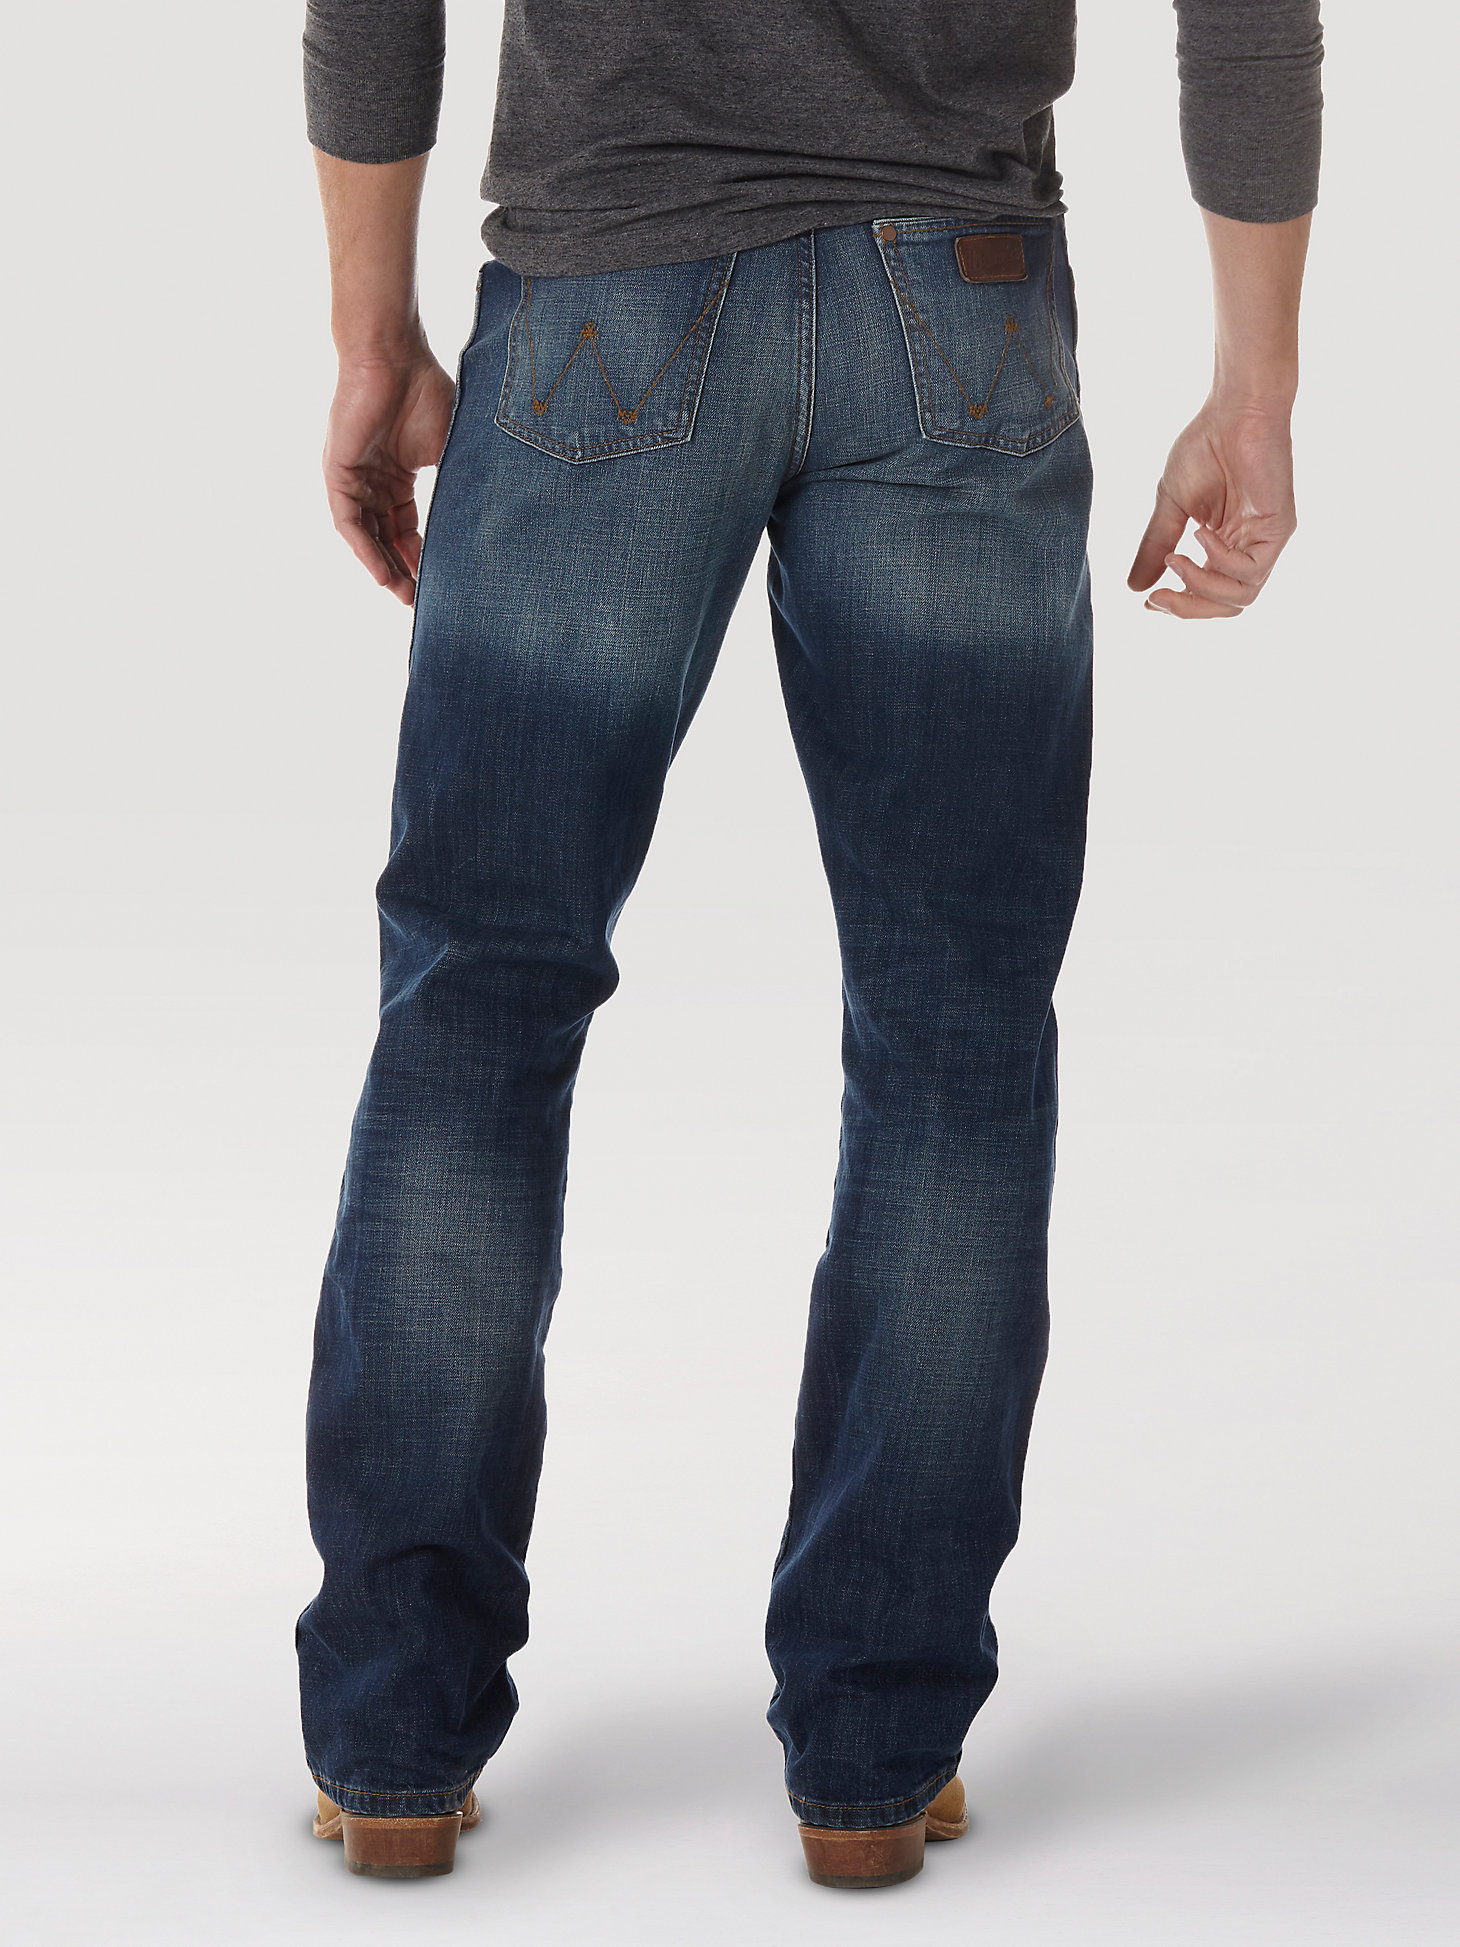 Men's Wrangler Retro® Relaxed Fit Bootcut Jean in JH Wash alternative view 2